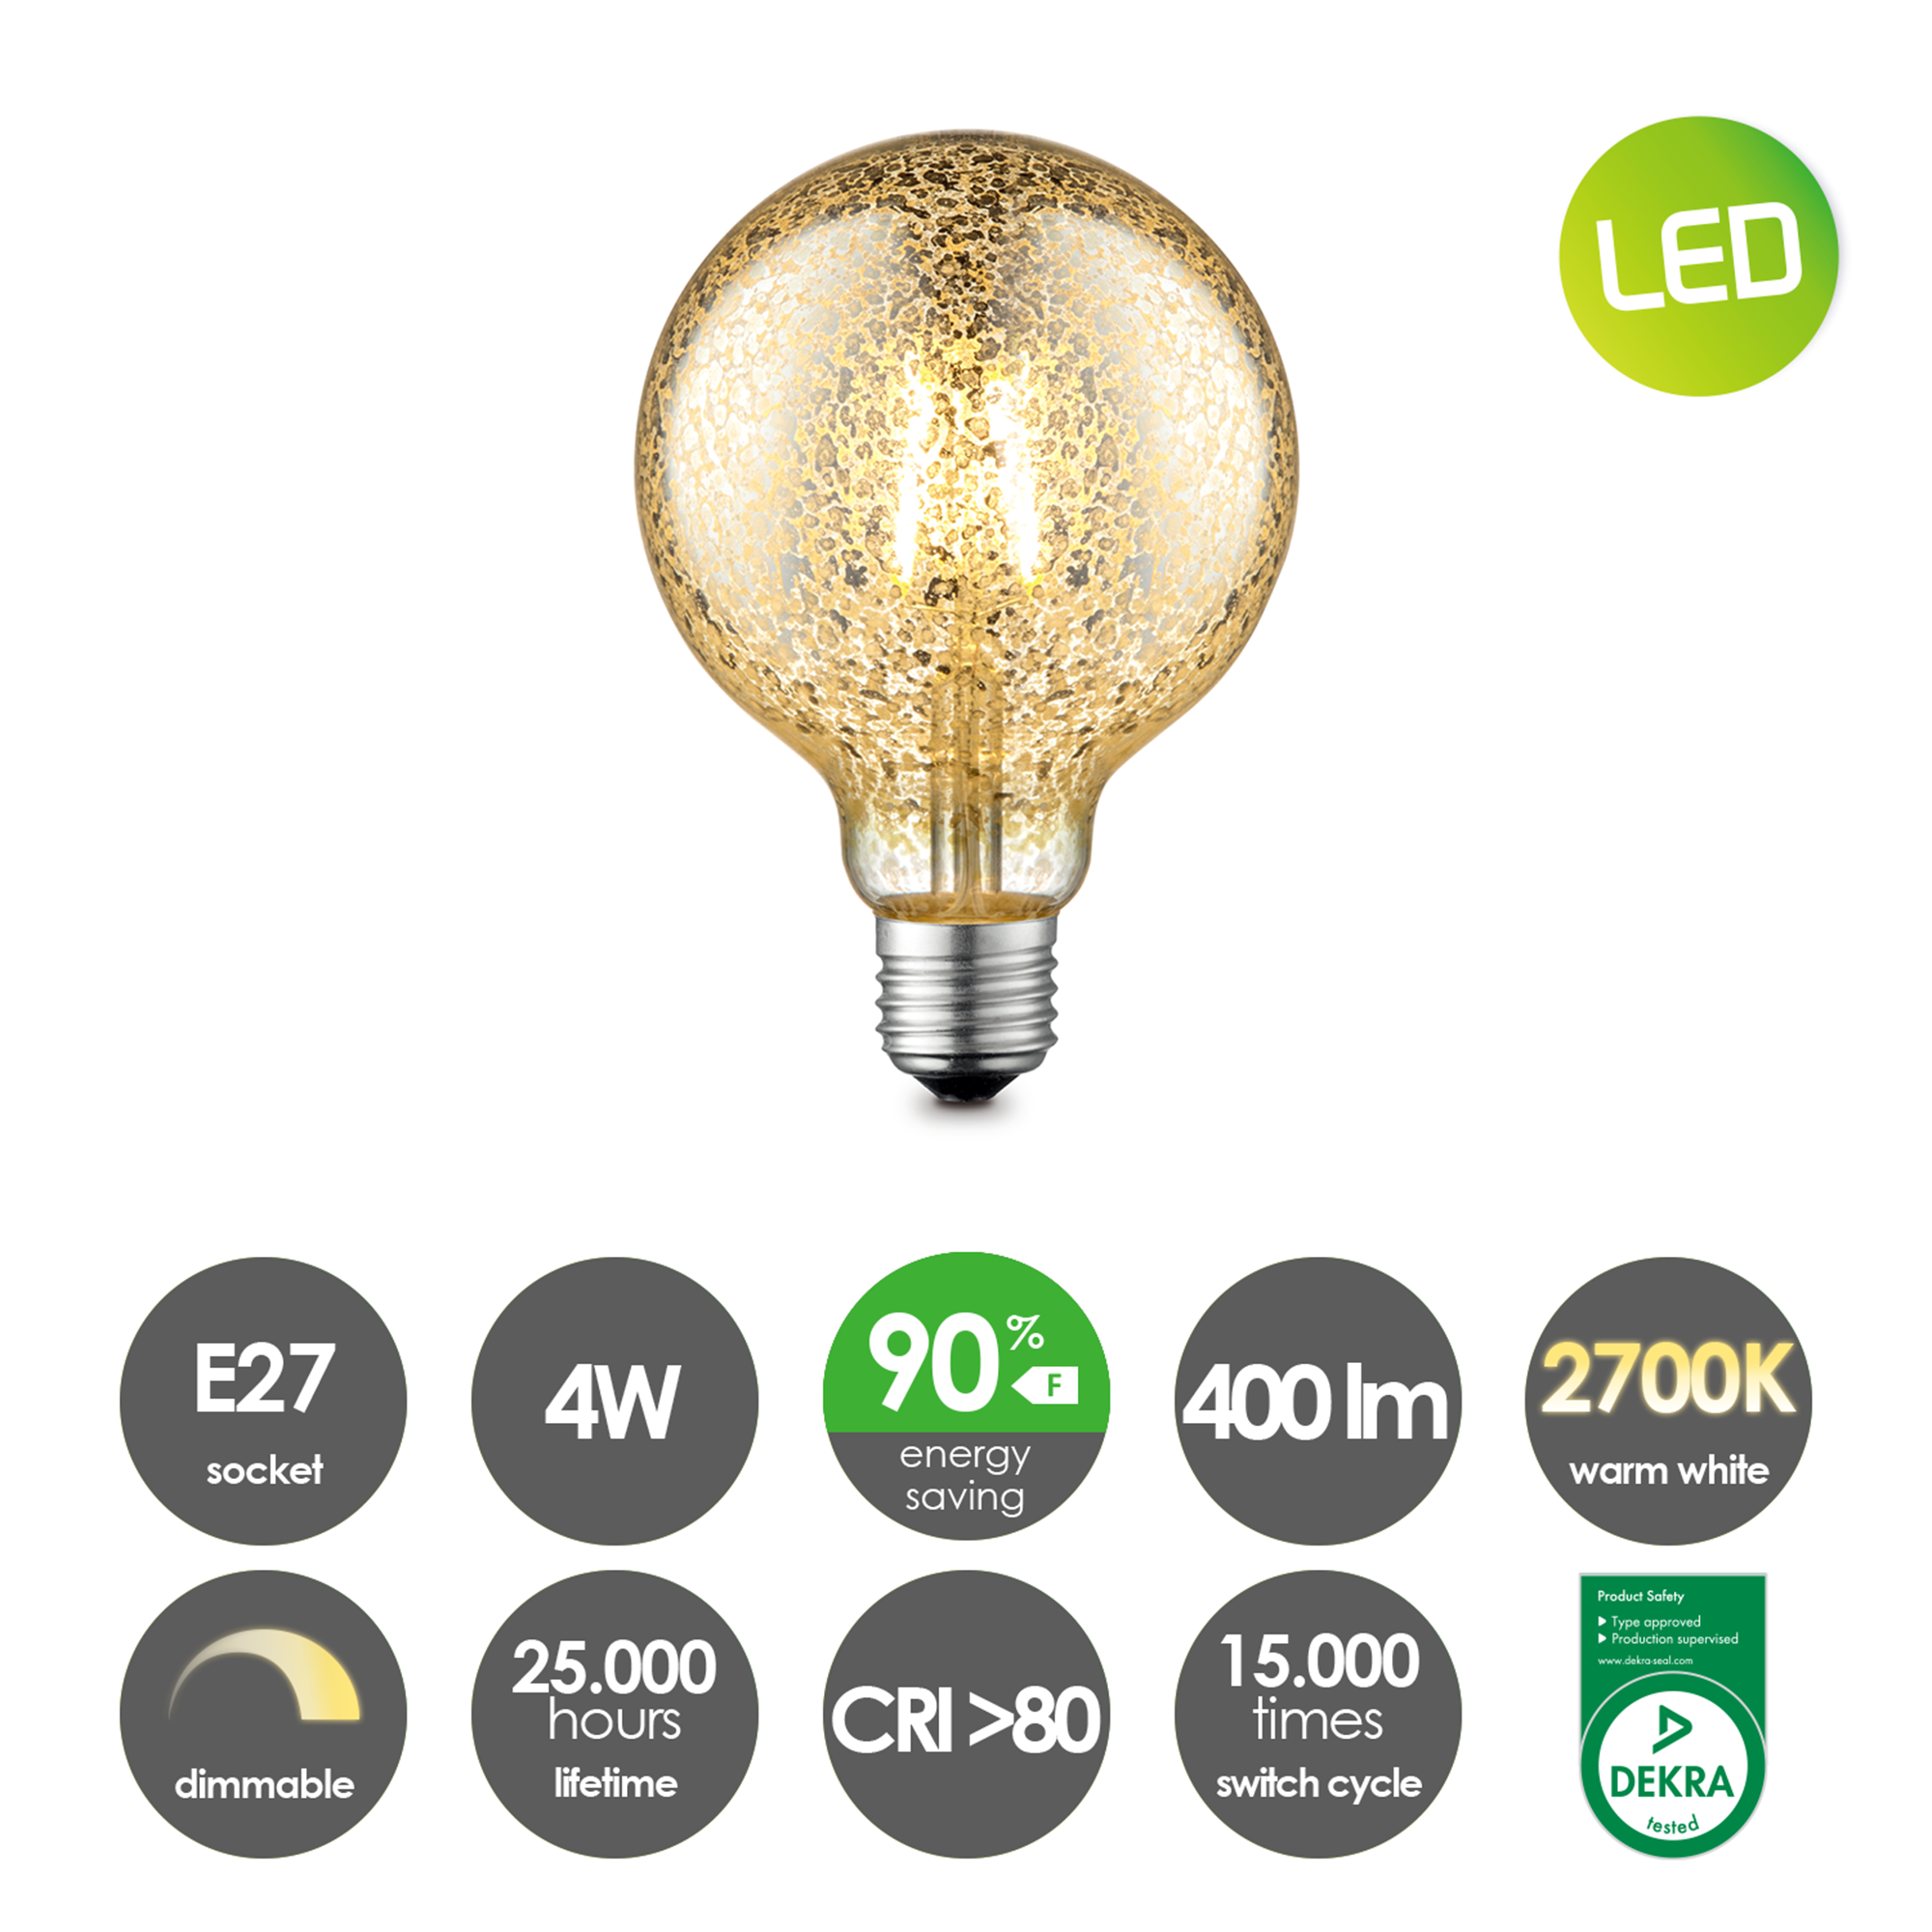 LED-Leuchtmittel 'Deco' silbern E27 4W 400 lm dimmbar + product picture